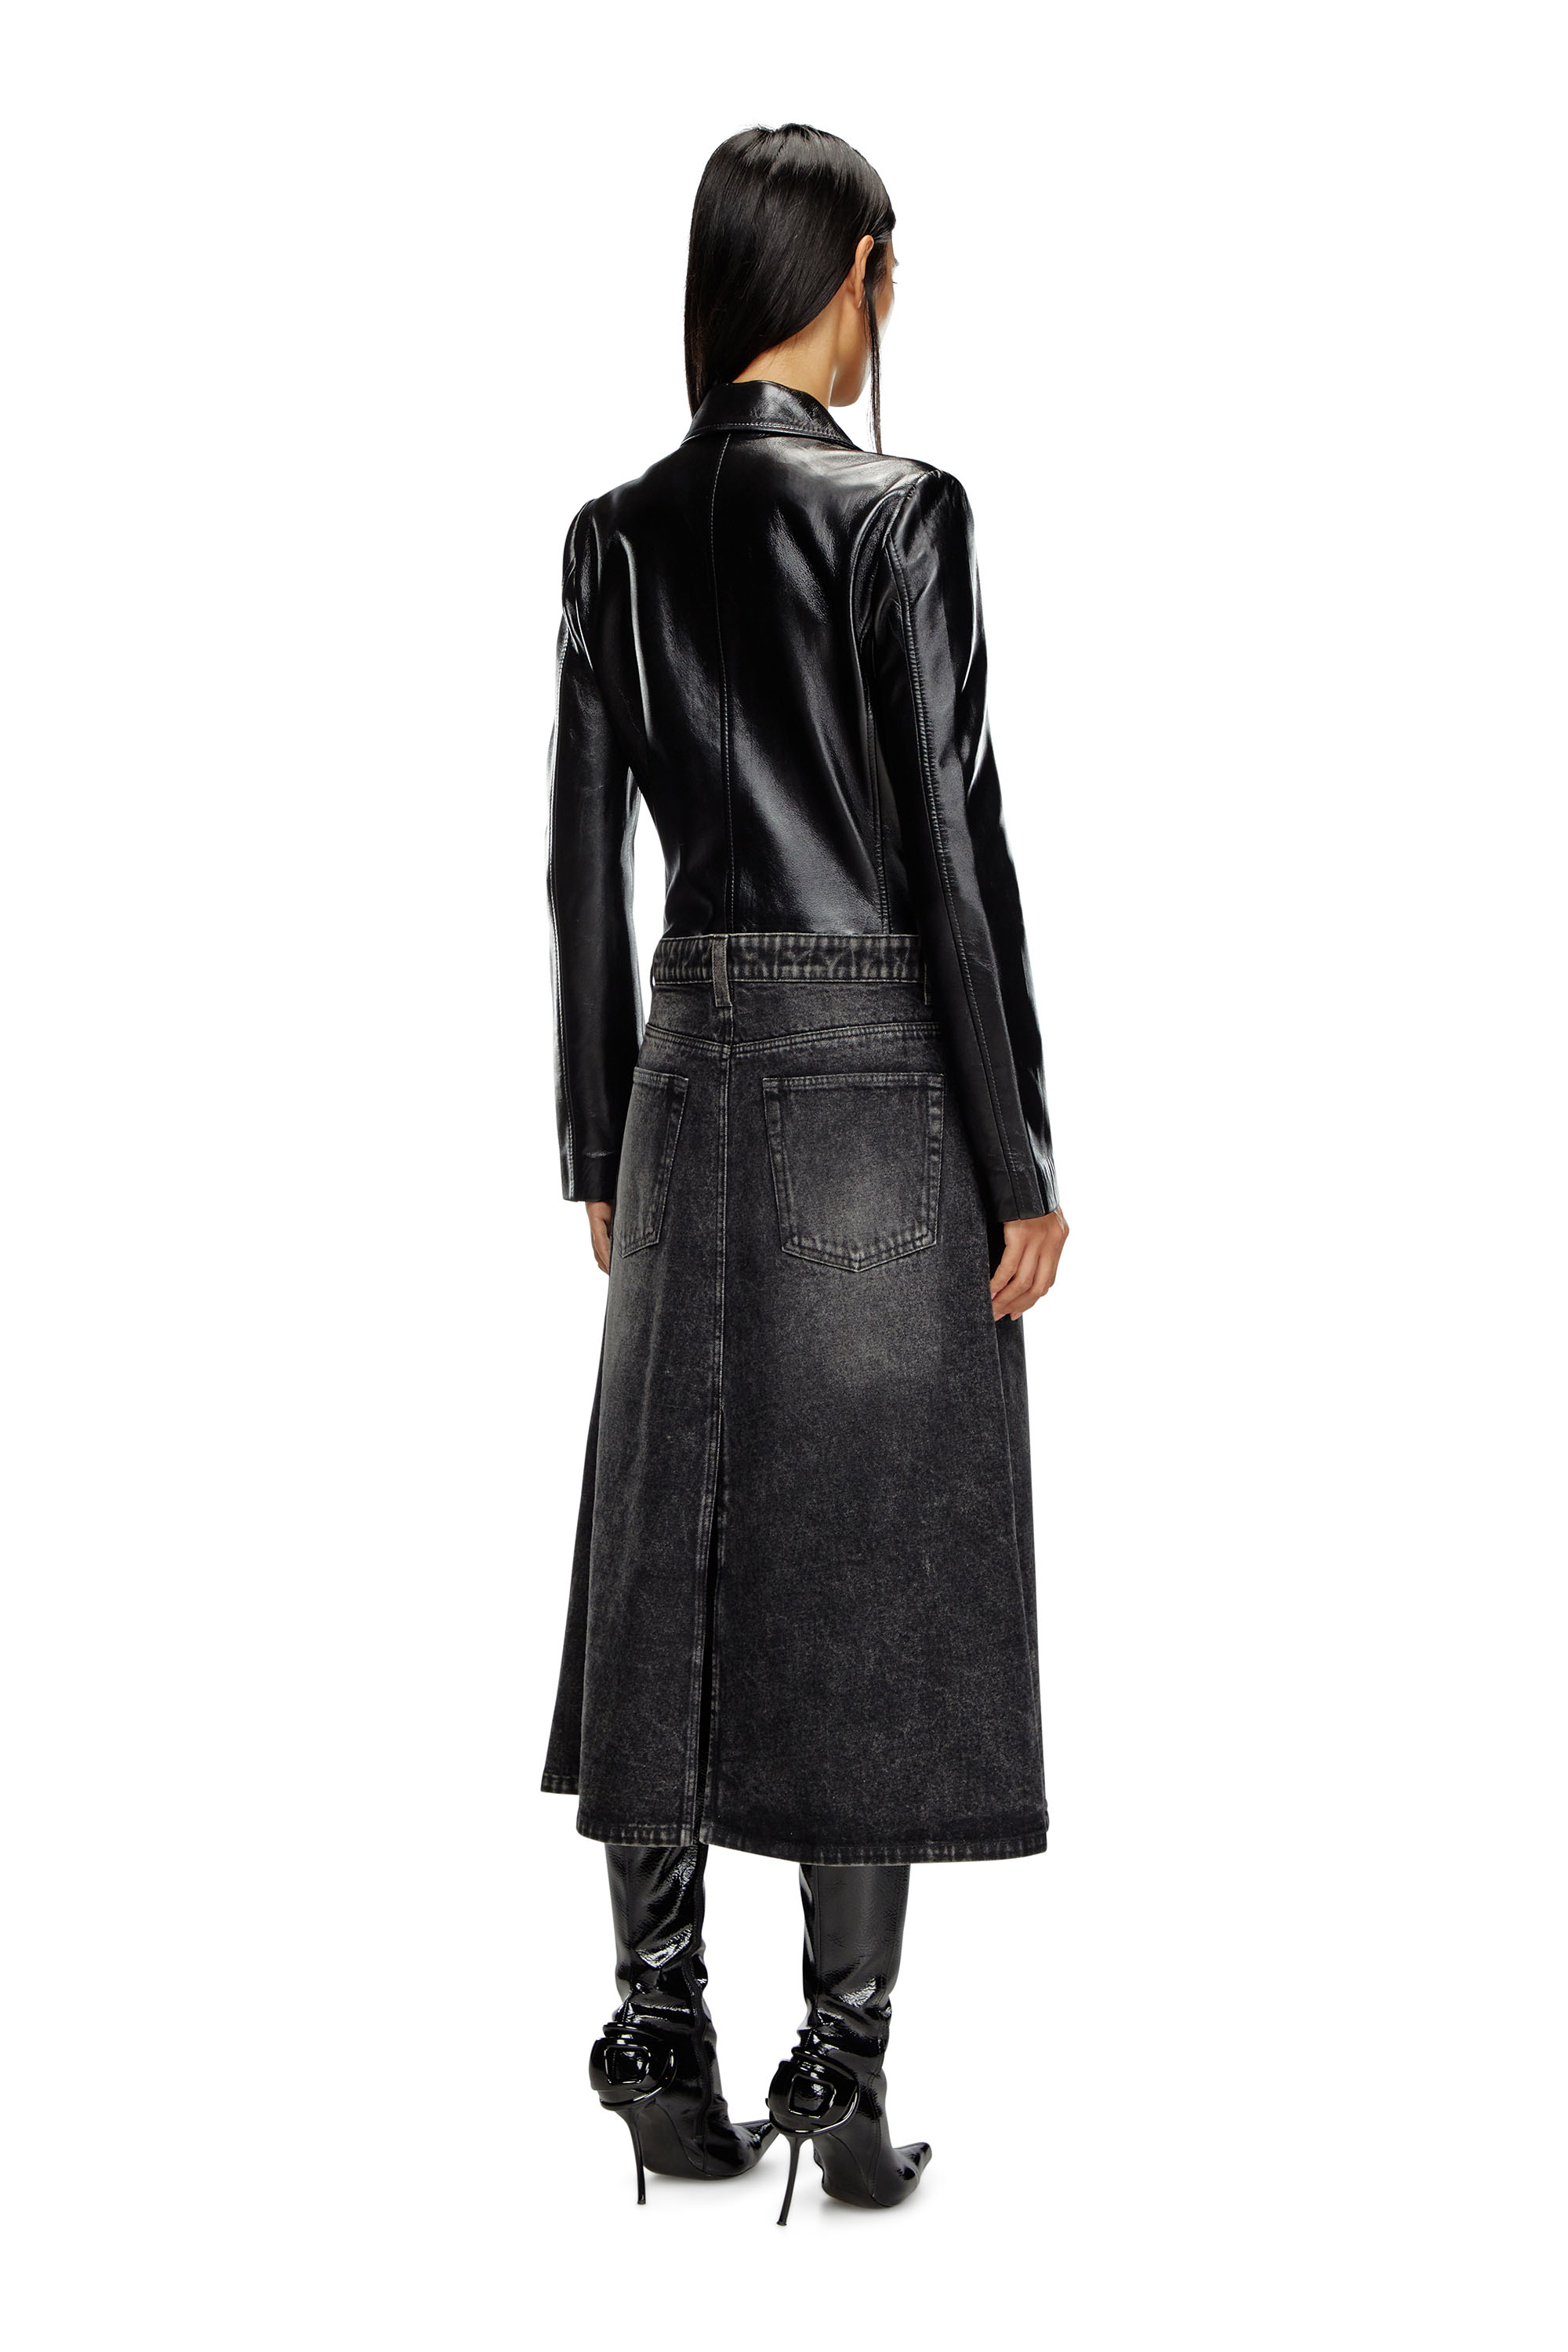 Diesel - L-ORY, Female Hybrid coat in denim and leather in ブラック - Image 4